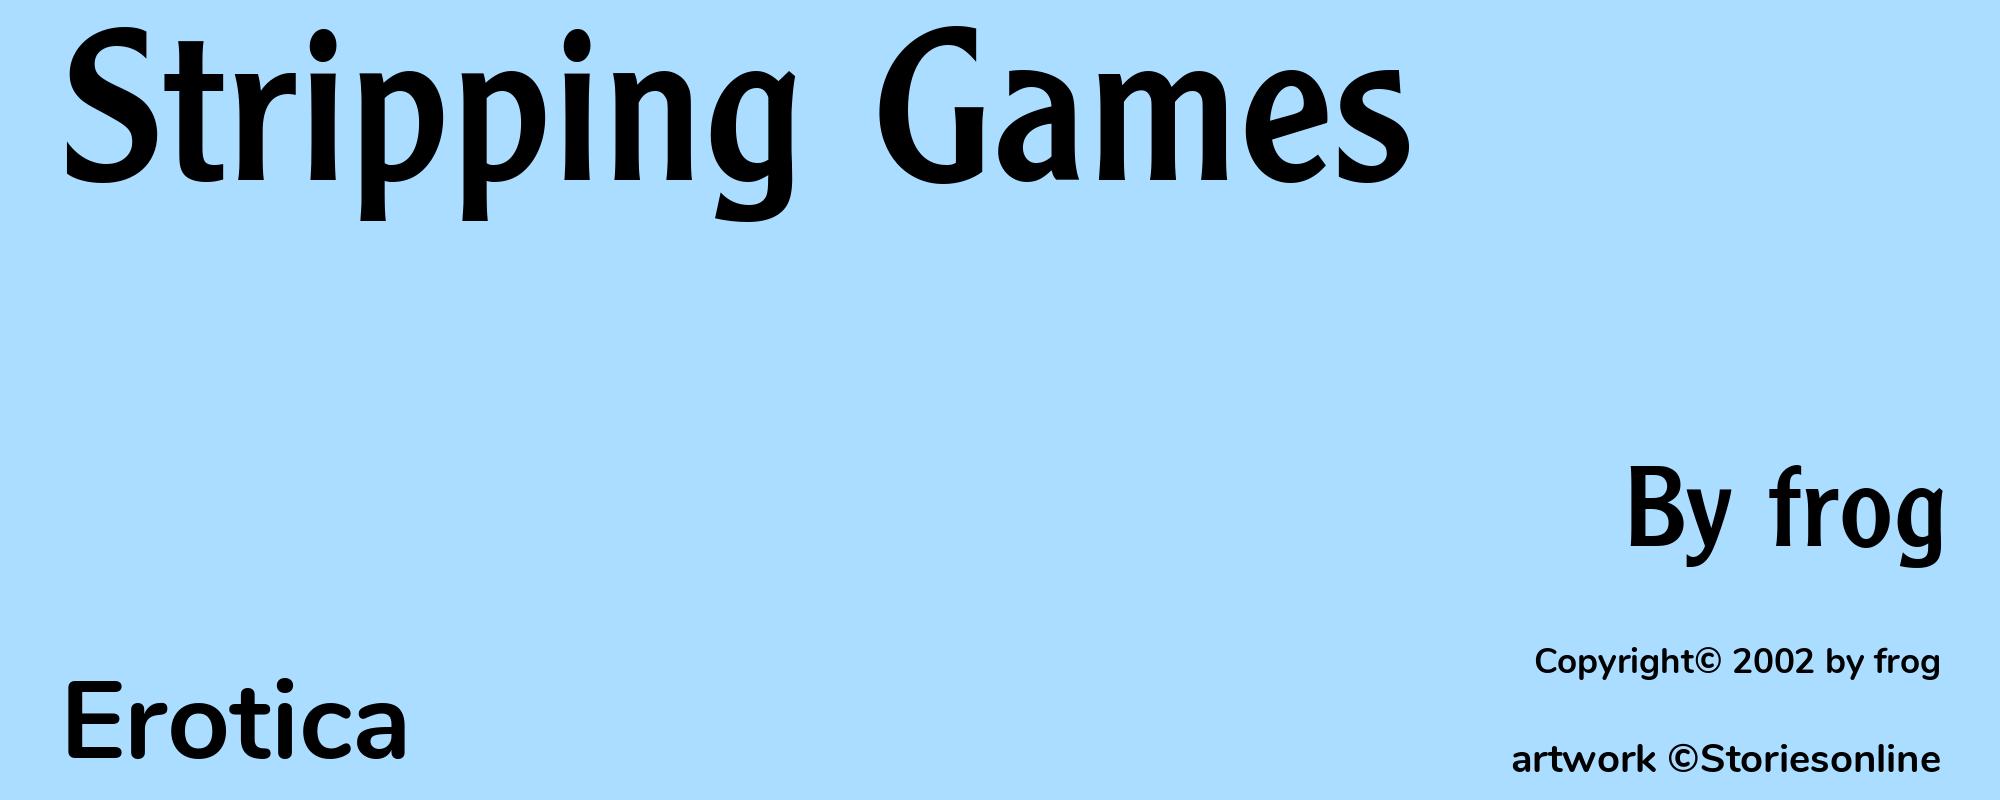 Stripping Games - Cover